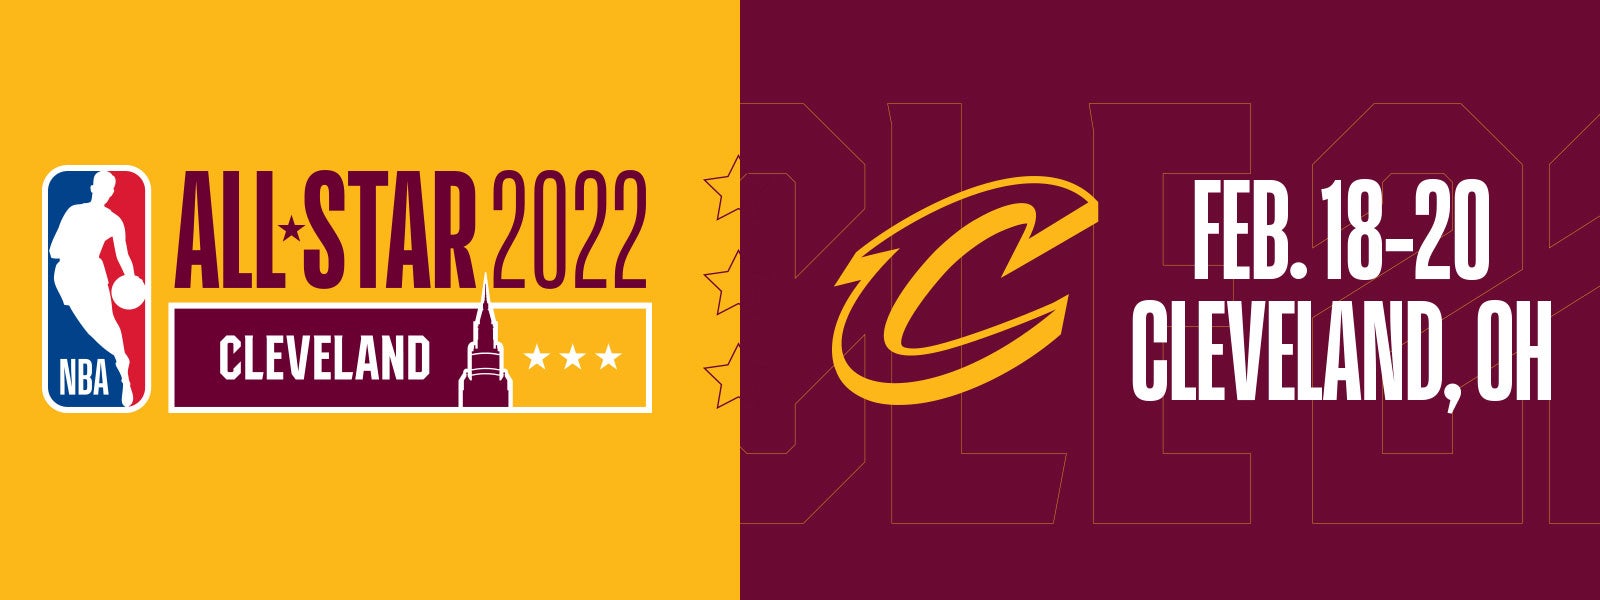 NBA unveils logo for 2022 All-Star Game in Cleveland